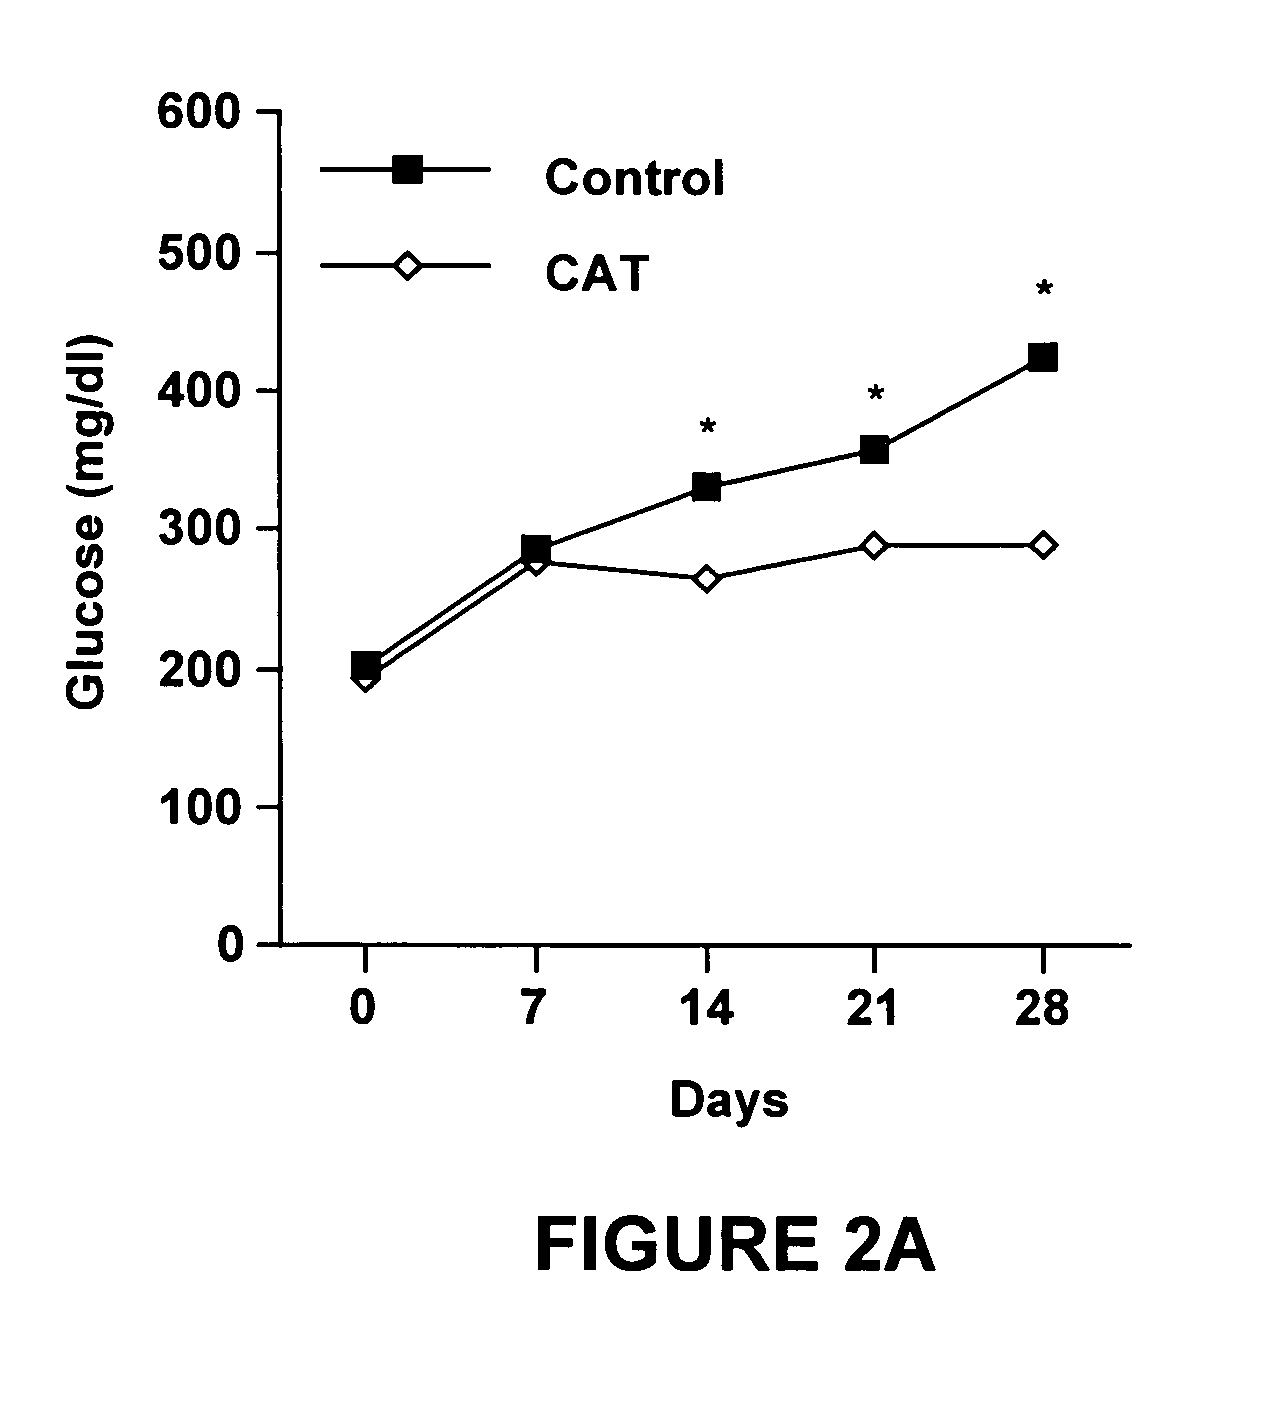 Method of using catalpic acid to treat and prevent type 2 diabetes and associated disorders